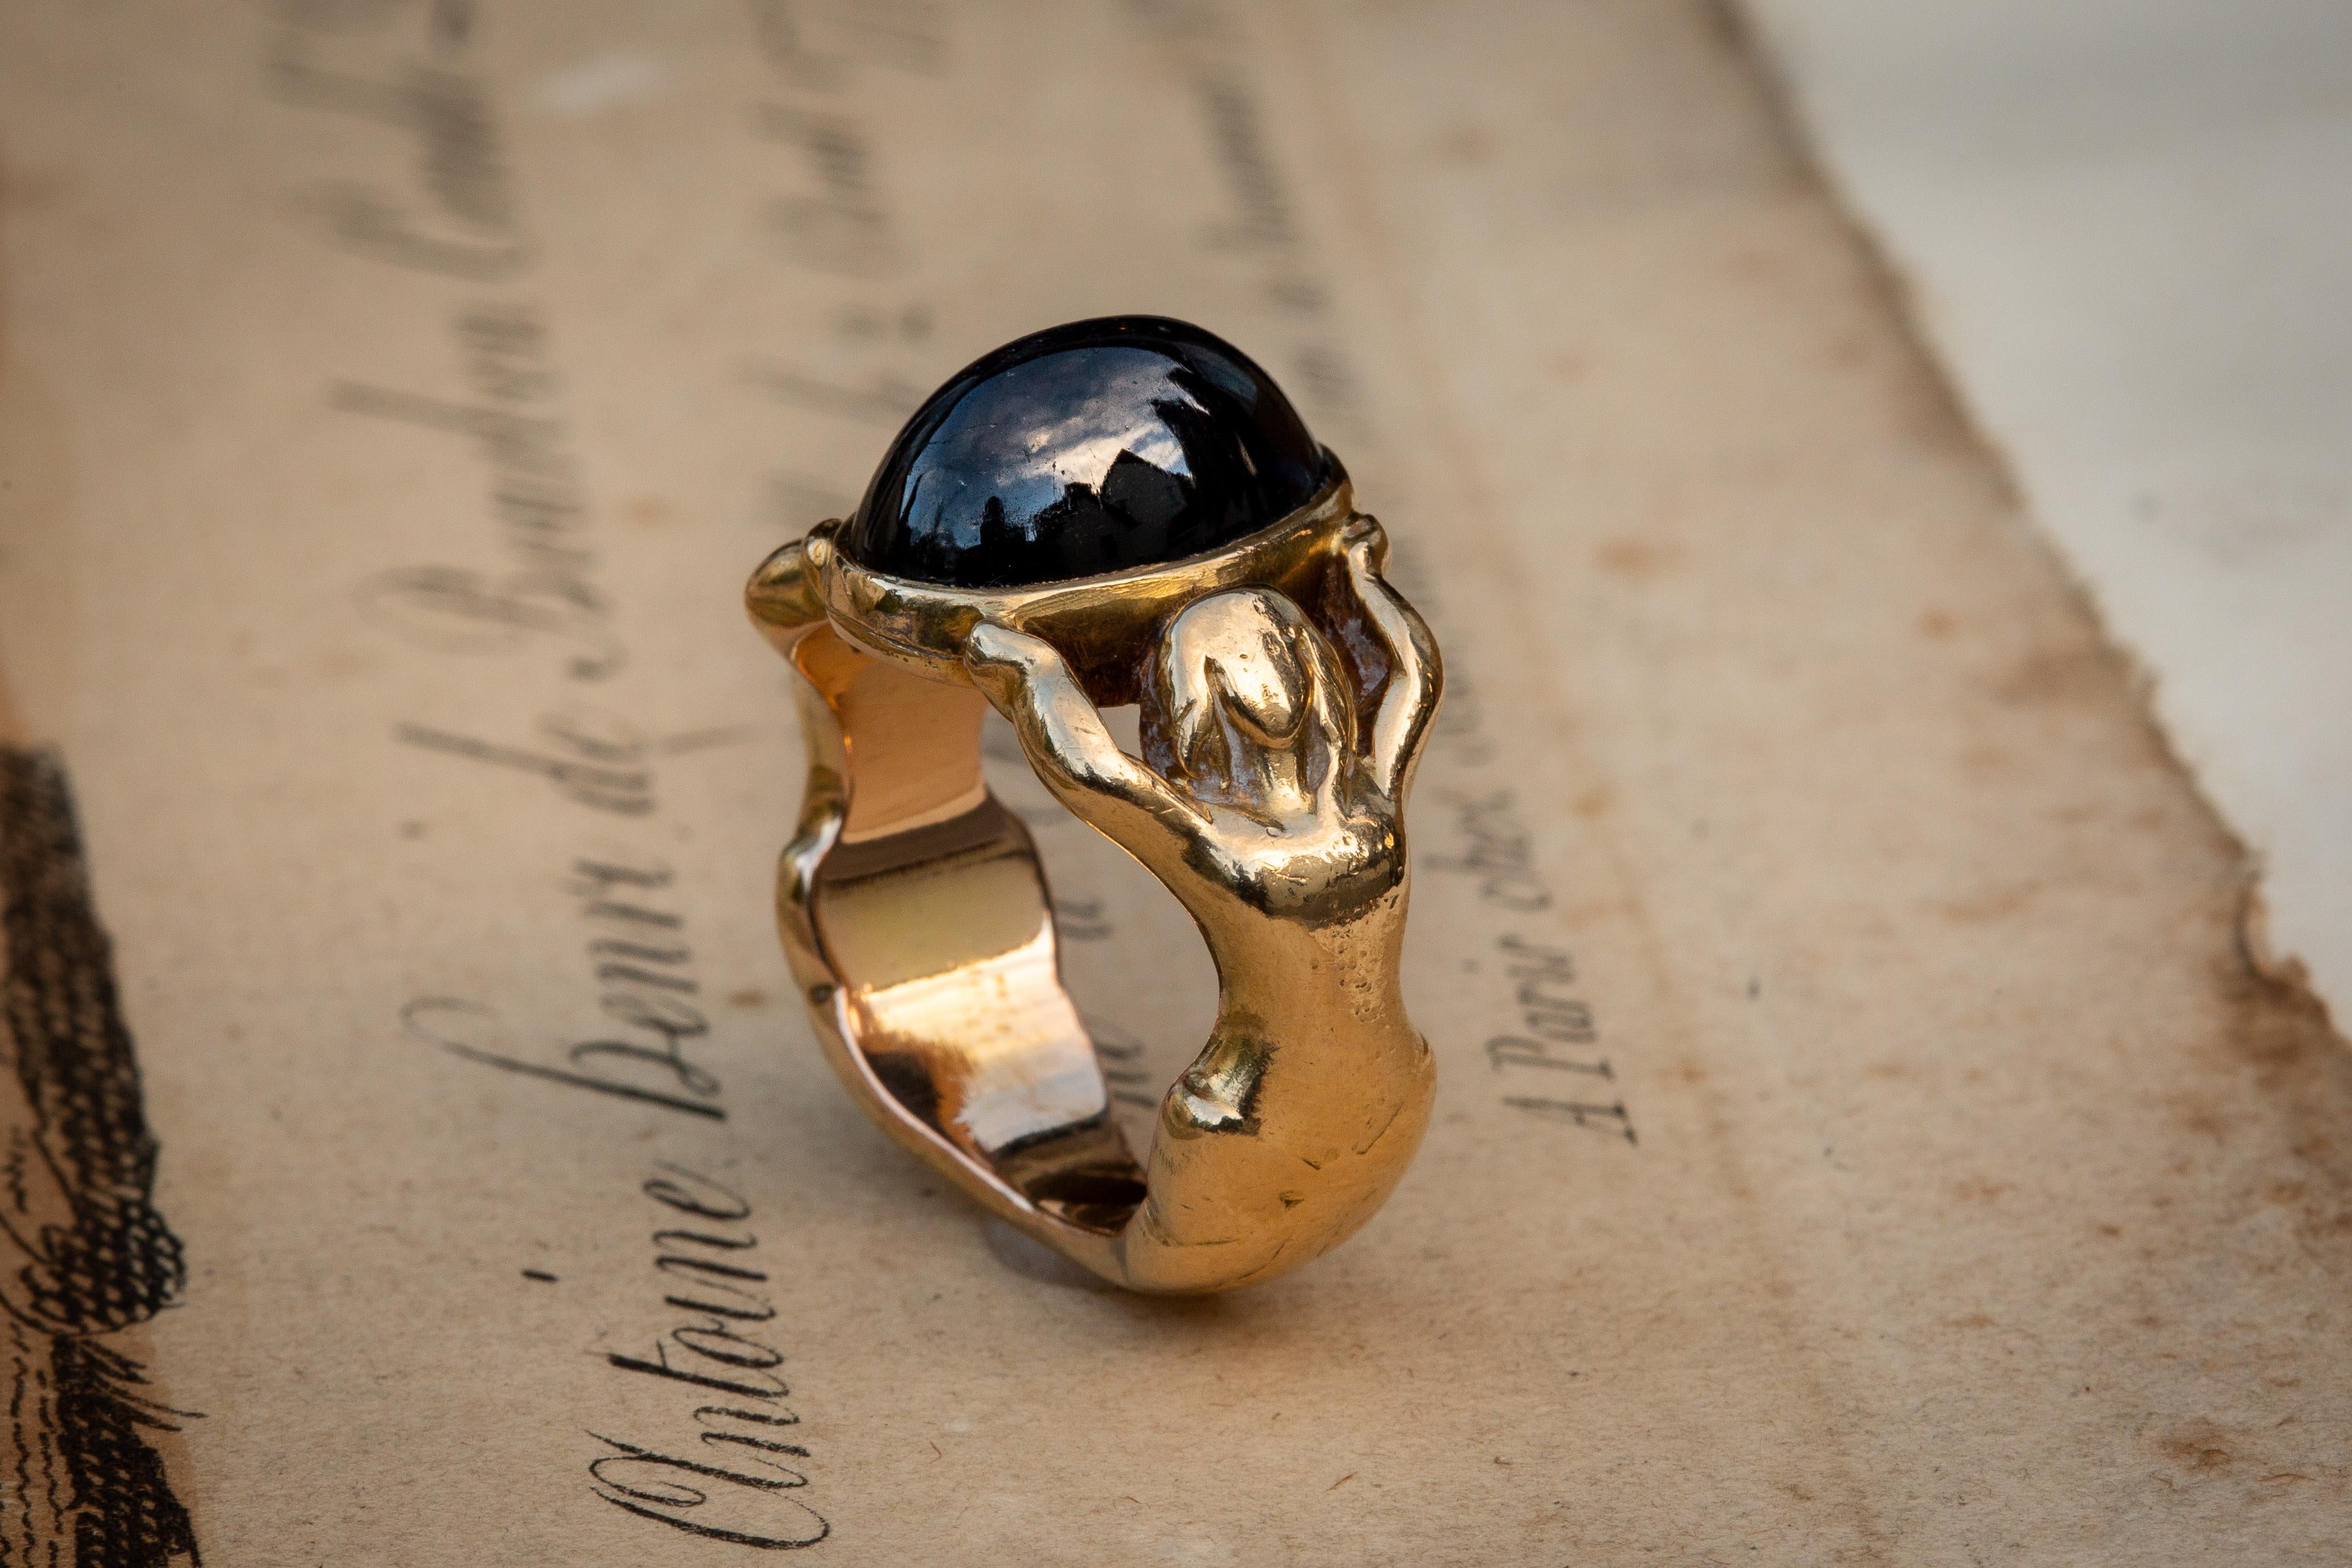 A superb French Art Nouveau figural statement ring, circa 1900. The mount is crafted in 18K yellow gold and features two nude outstretched ethereal ladies/nymphs who carry a stunning high-domed deep blue 8.87Ct sapphire cabochon. 

This highly